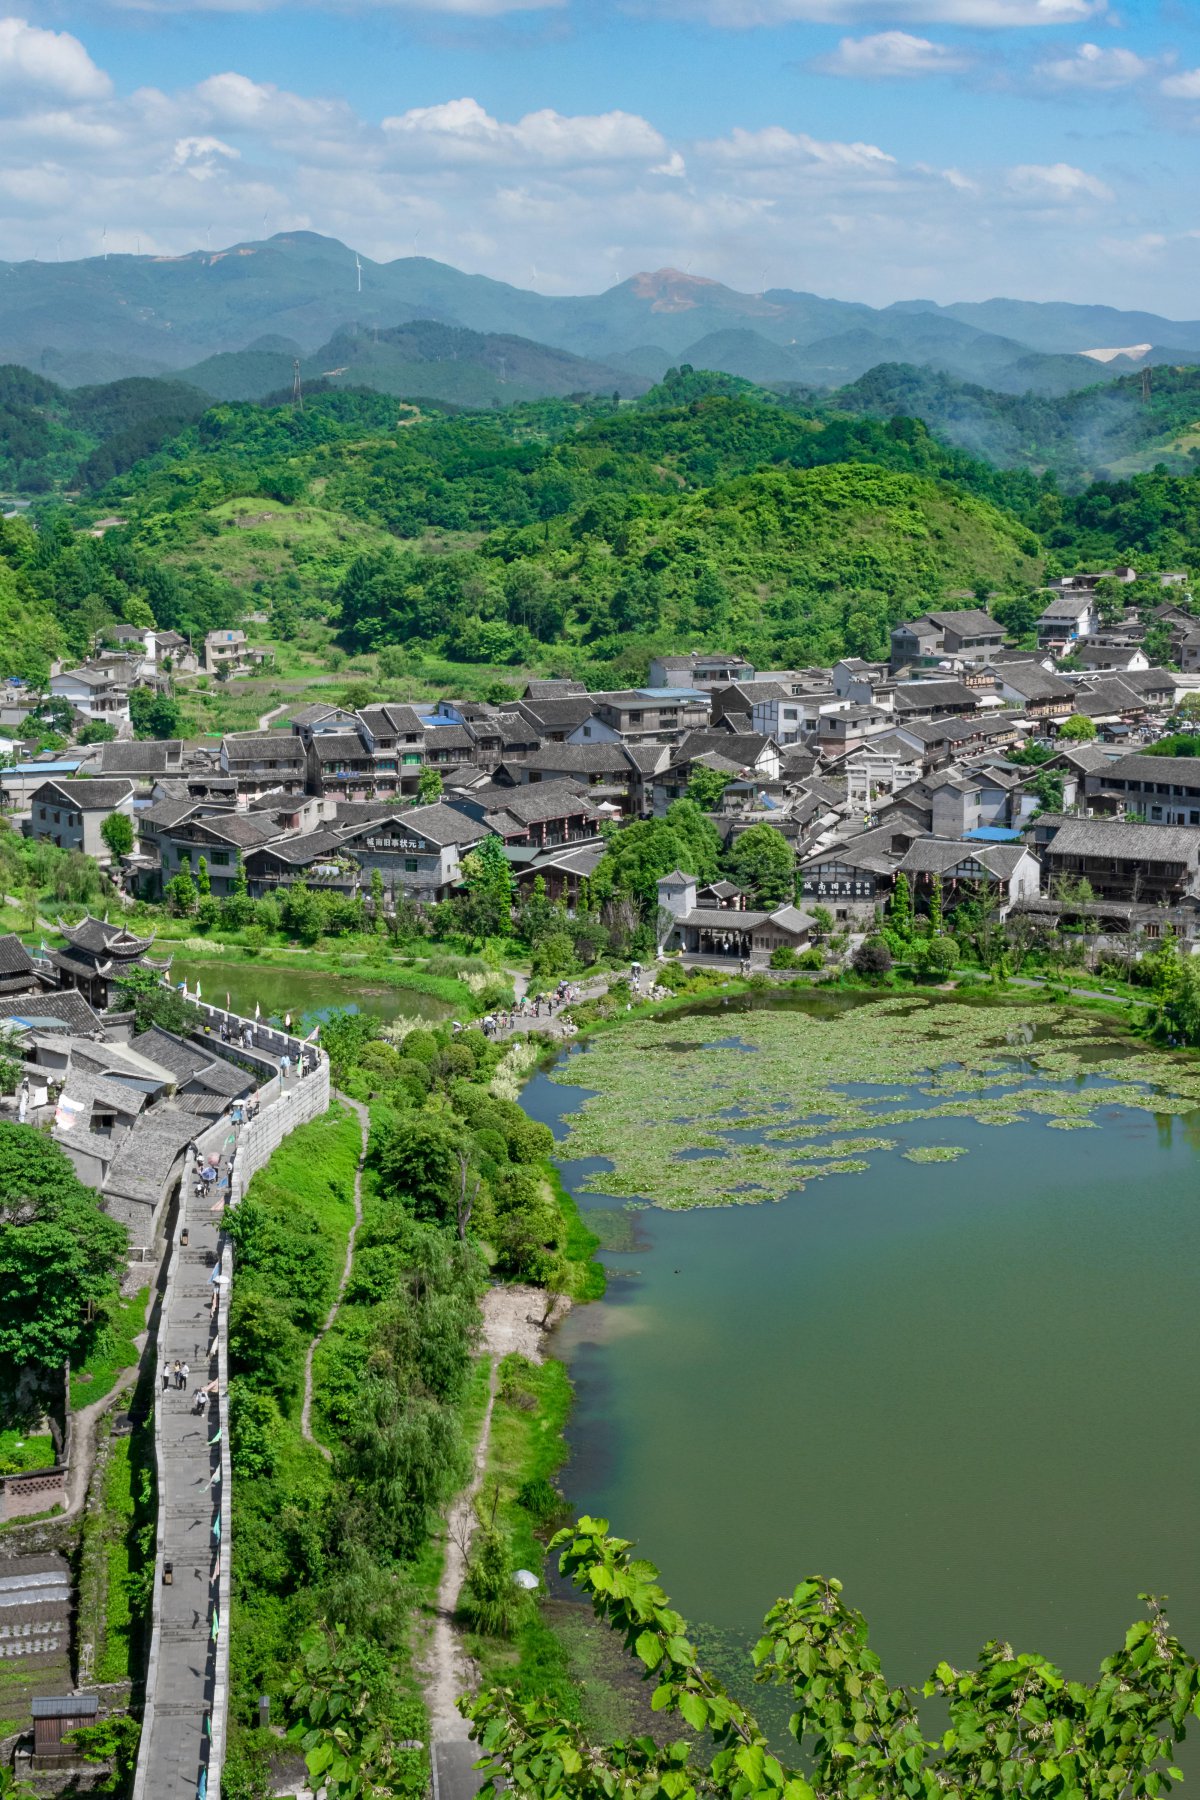 Pictures of Qingyan Ancient Town in Guiyang, a gathering of humanity and culture